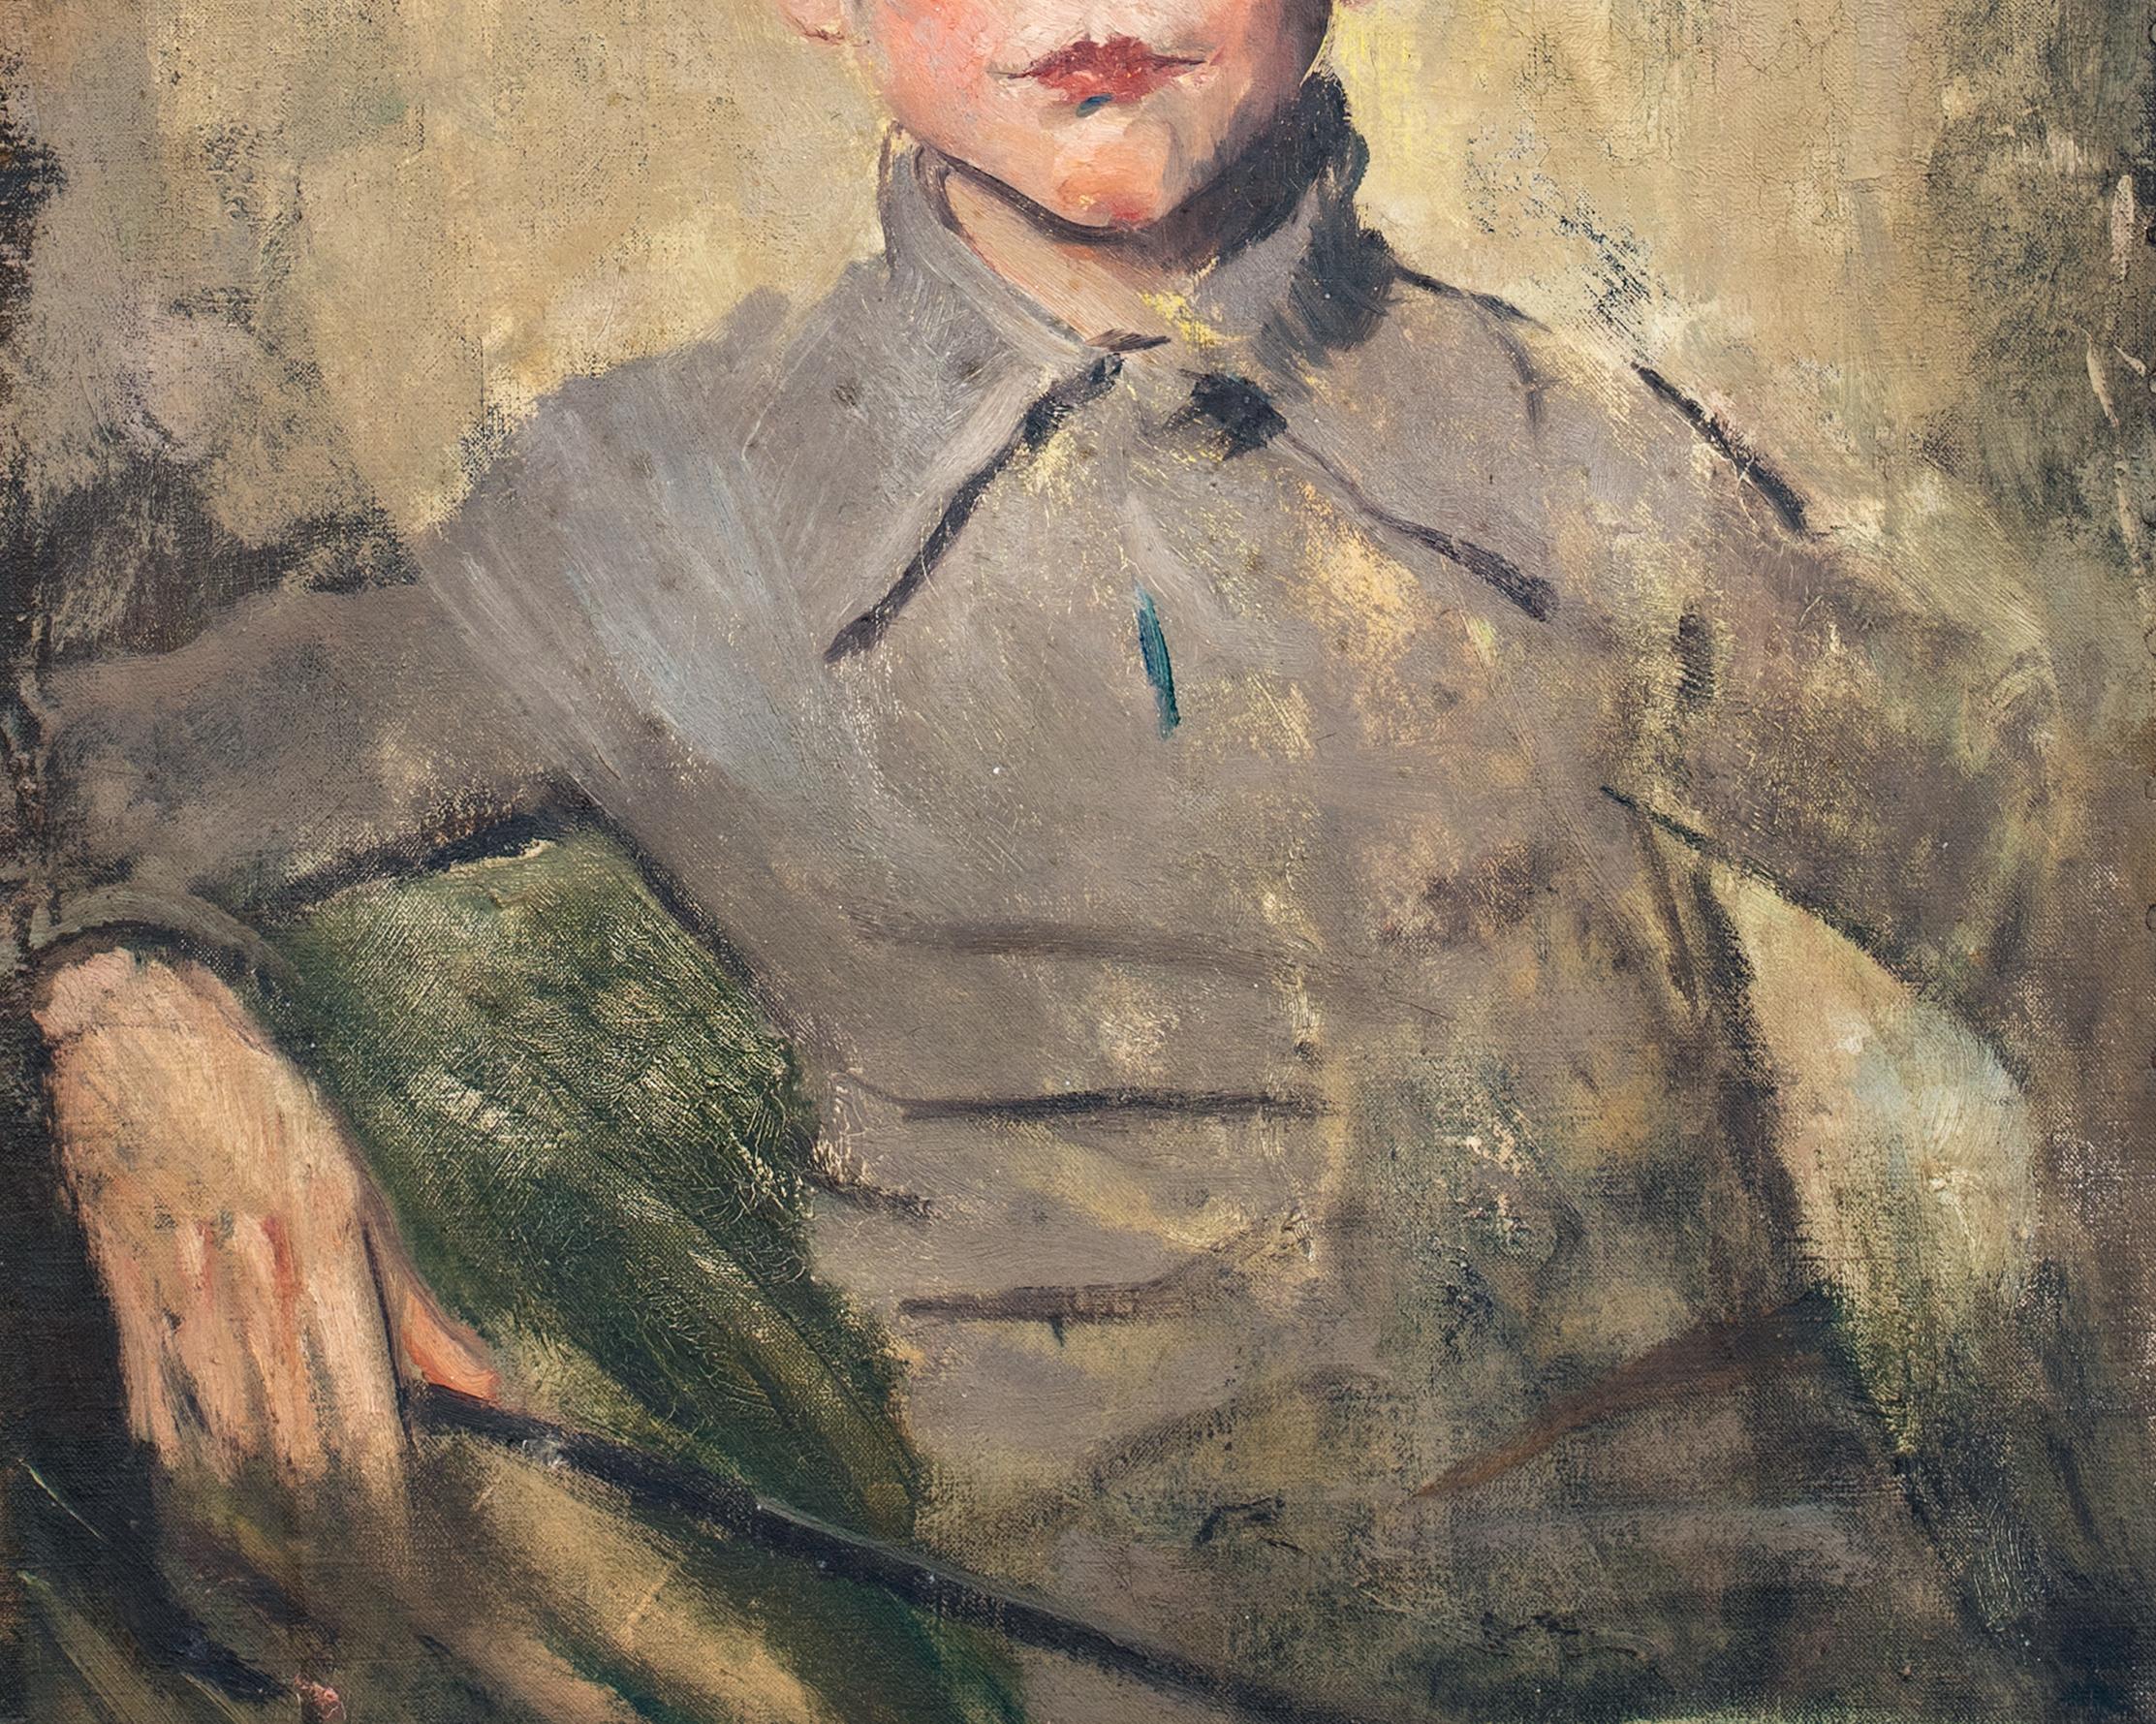 Portrait of A Boy, N Williamson, early 20th Century

inscribed to GLYN WARREN PHILPOT (1884-1937)

Large early 20th Century portrait of a young boy seated, oil on canvas inscribed to Glyn Philpot. Excellent quality and condition portrait of the